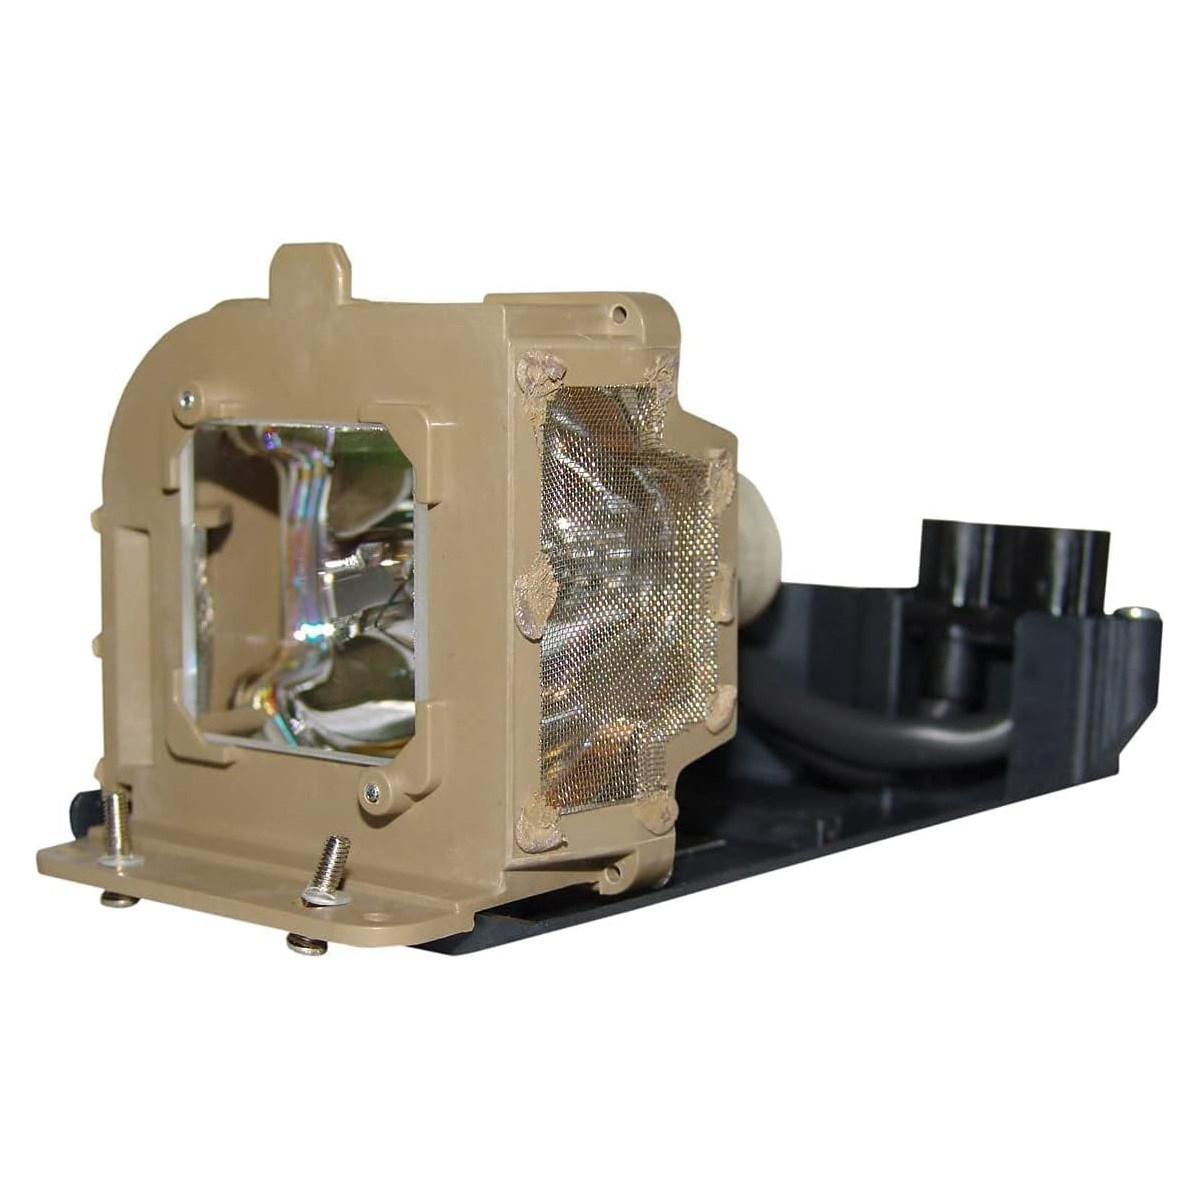 Replacement Projector lamp U7-30028-057 For PLUS U7-300